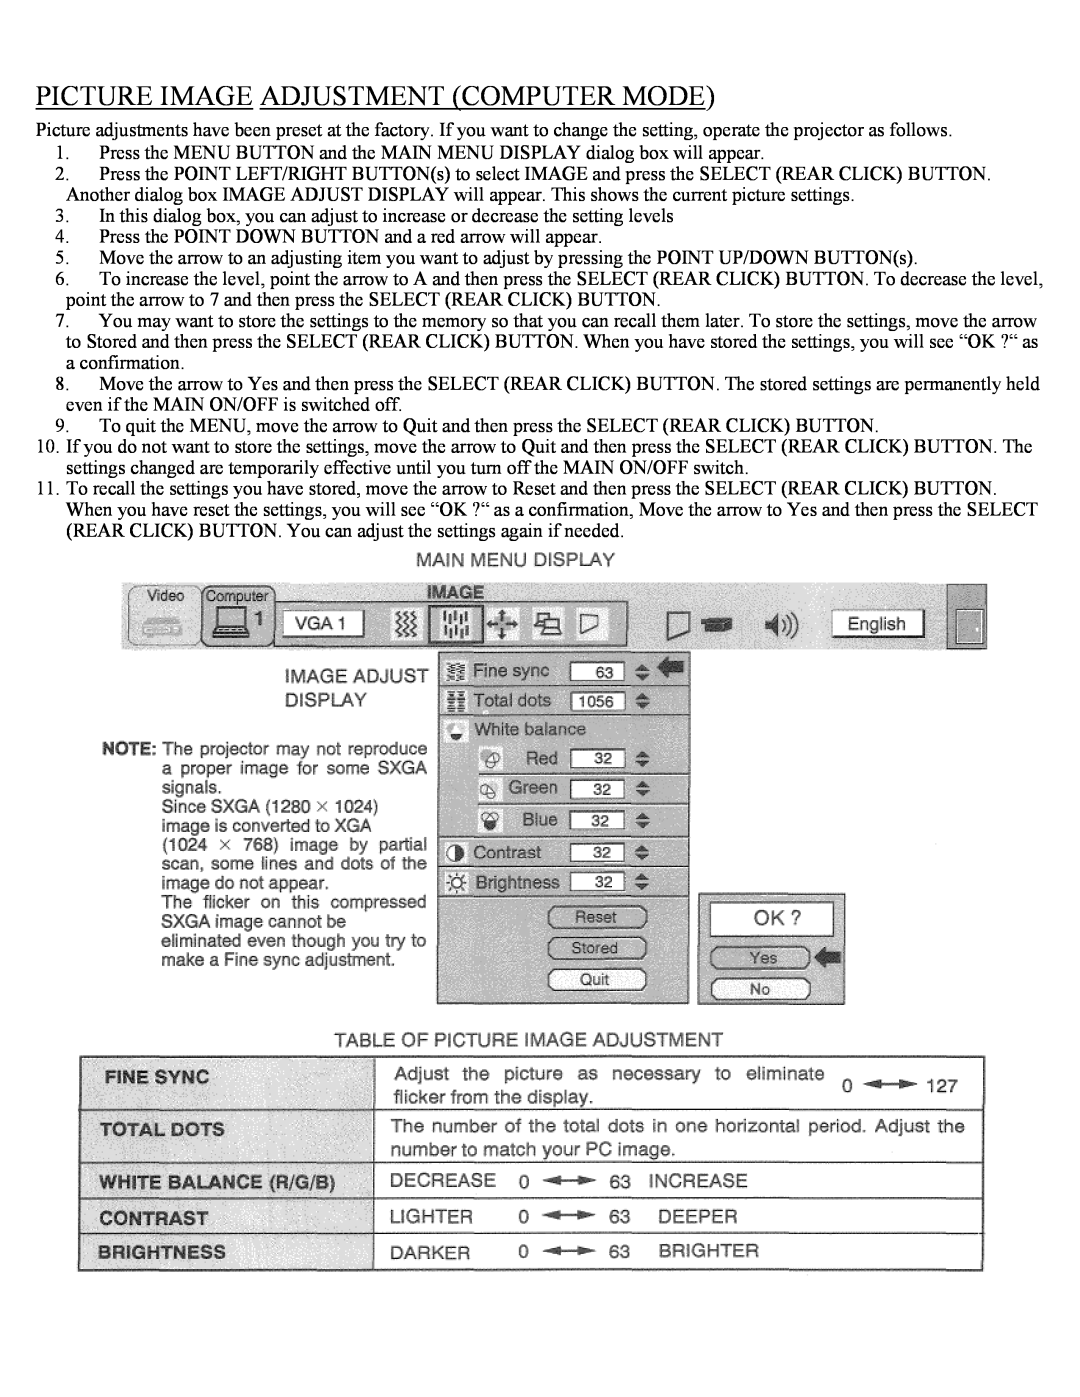 Eiki LC-X1UA, LC-X1UL instruction manual Picture Image Adjustment Computer Mode 